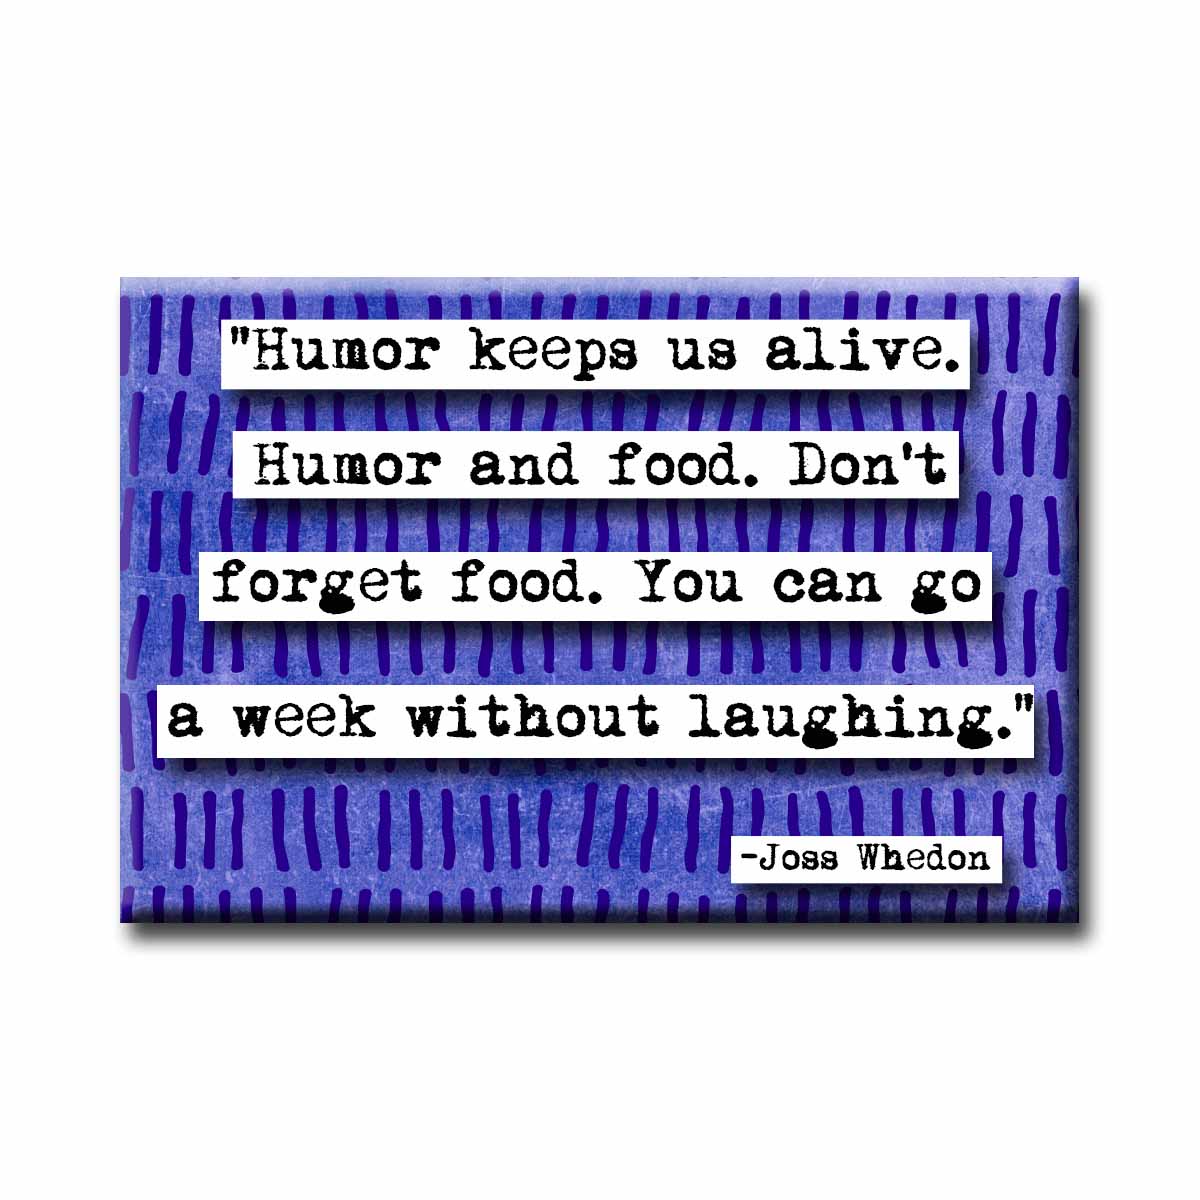 Joss Whedon Humor and Food Quote Refrigerator Magnet